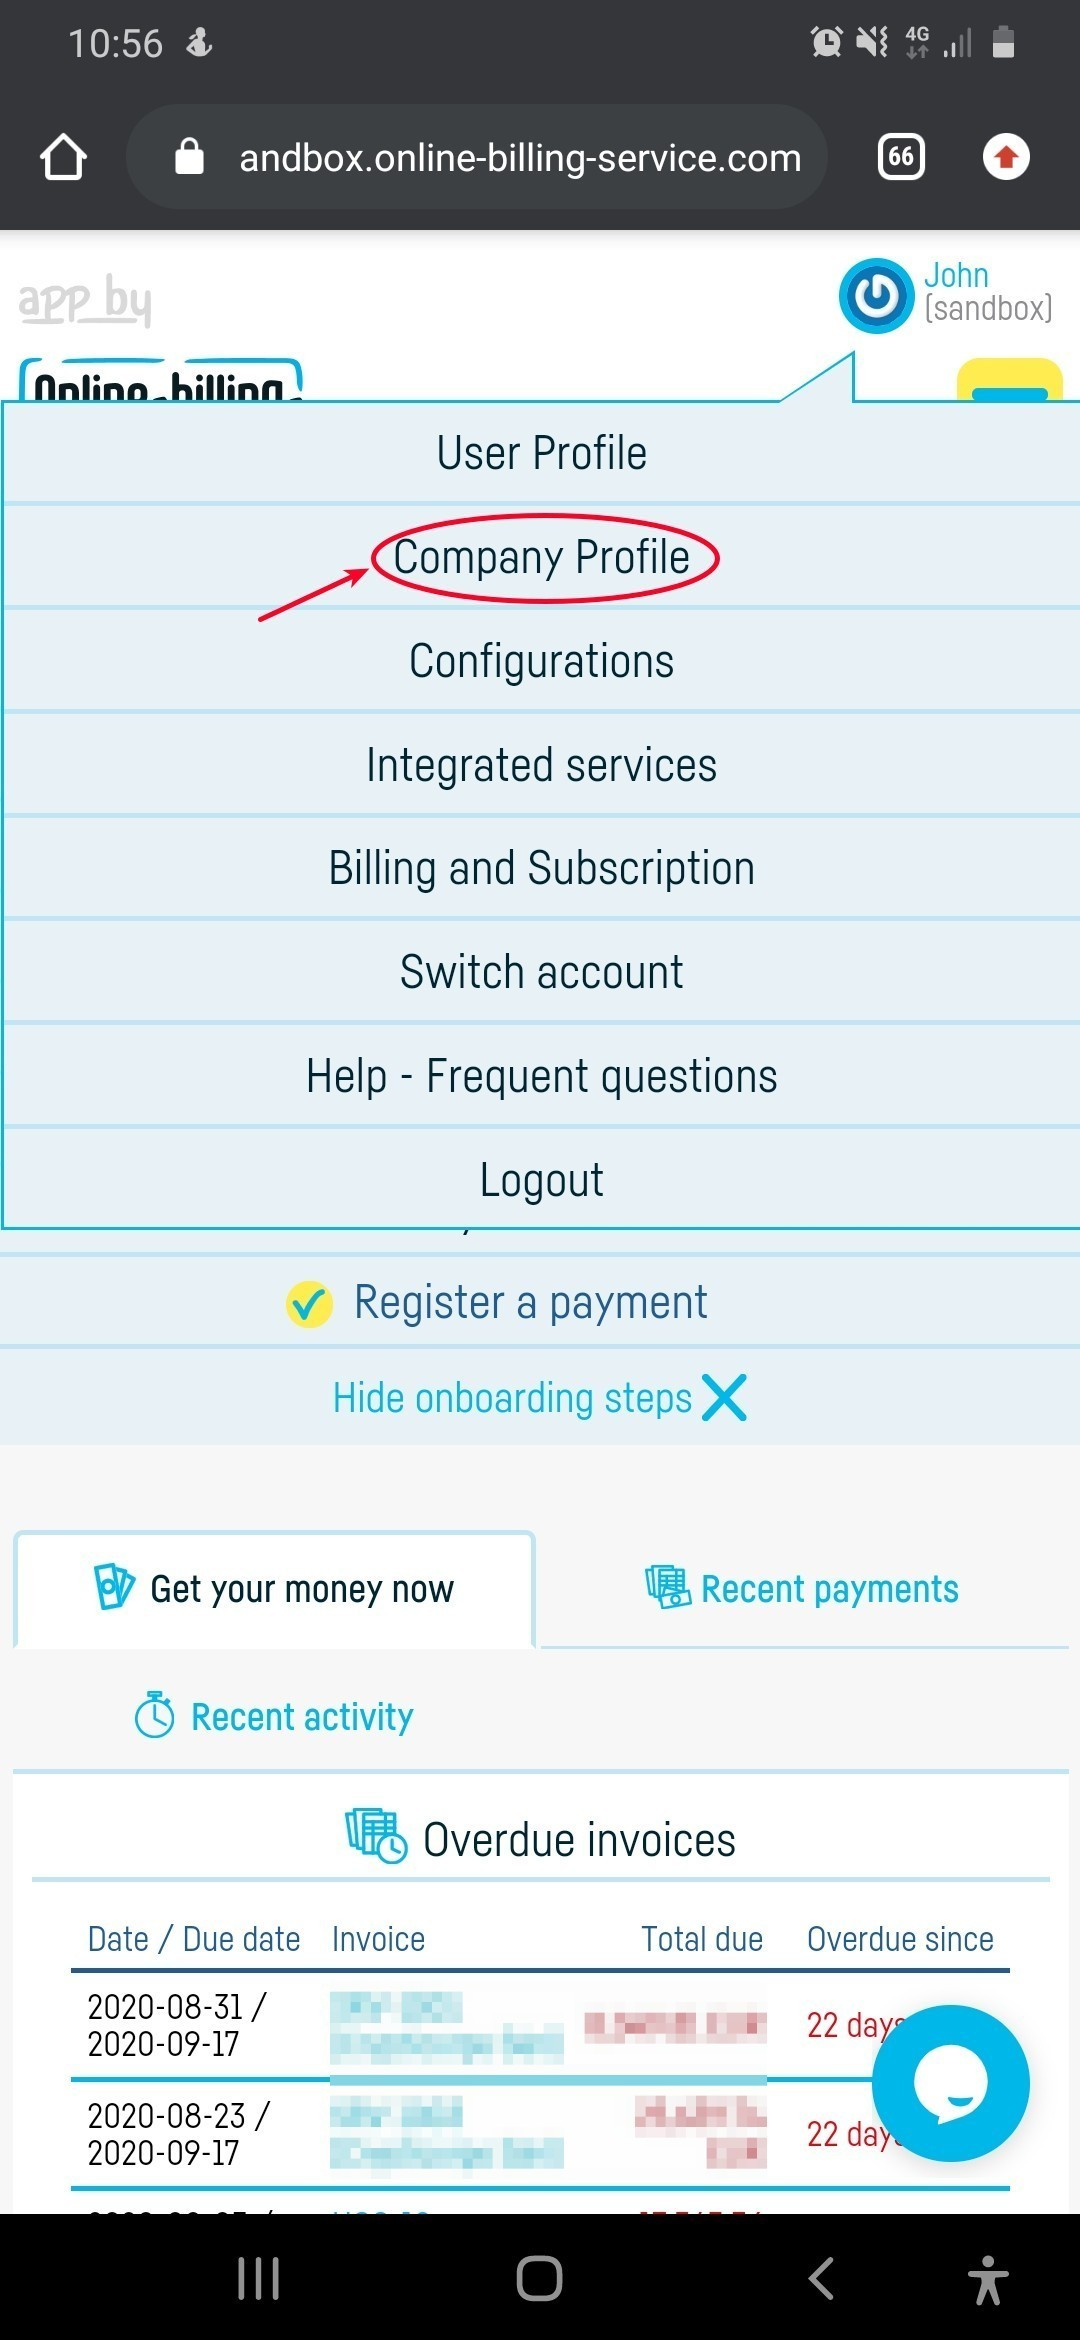 How do I close my account at online-billing-service? - step 1